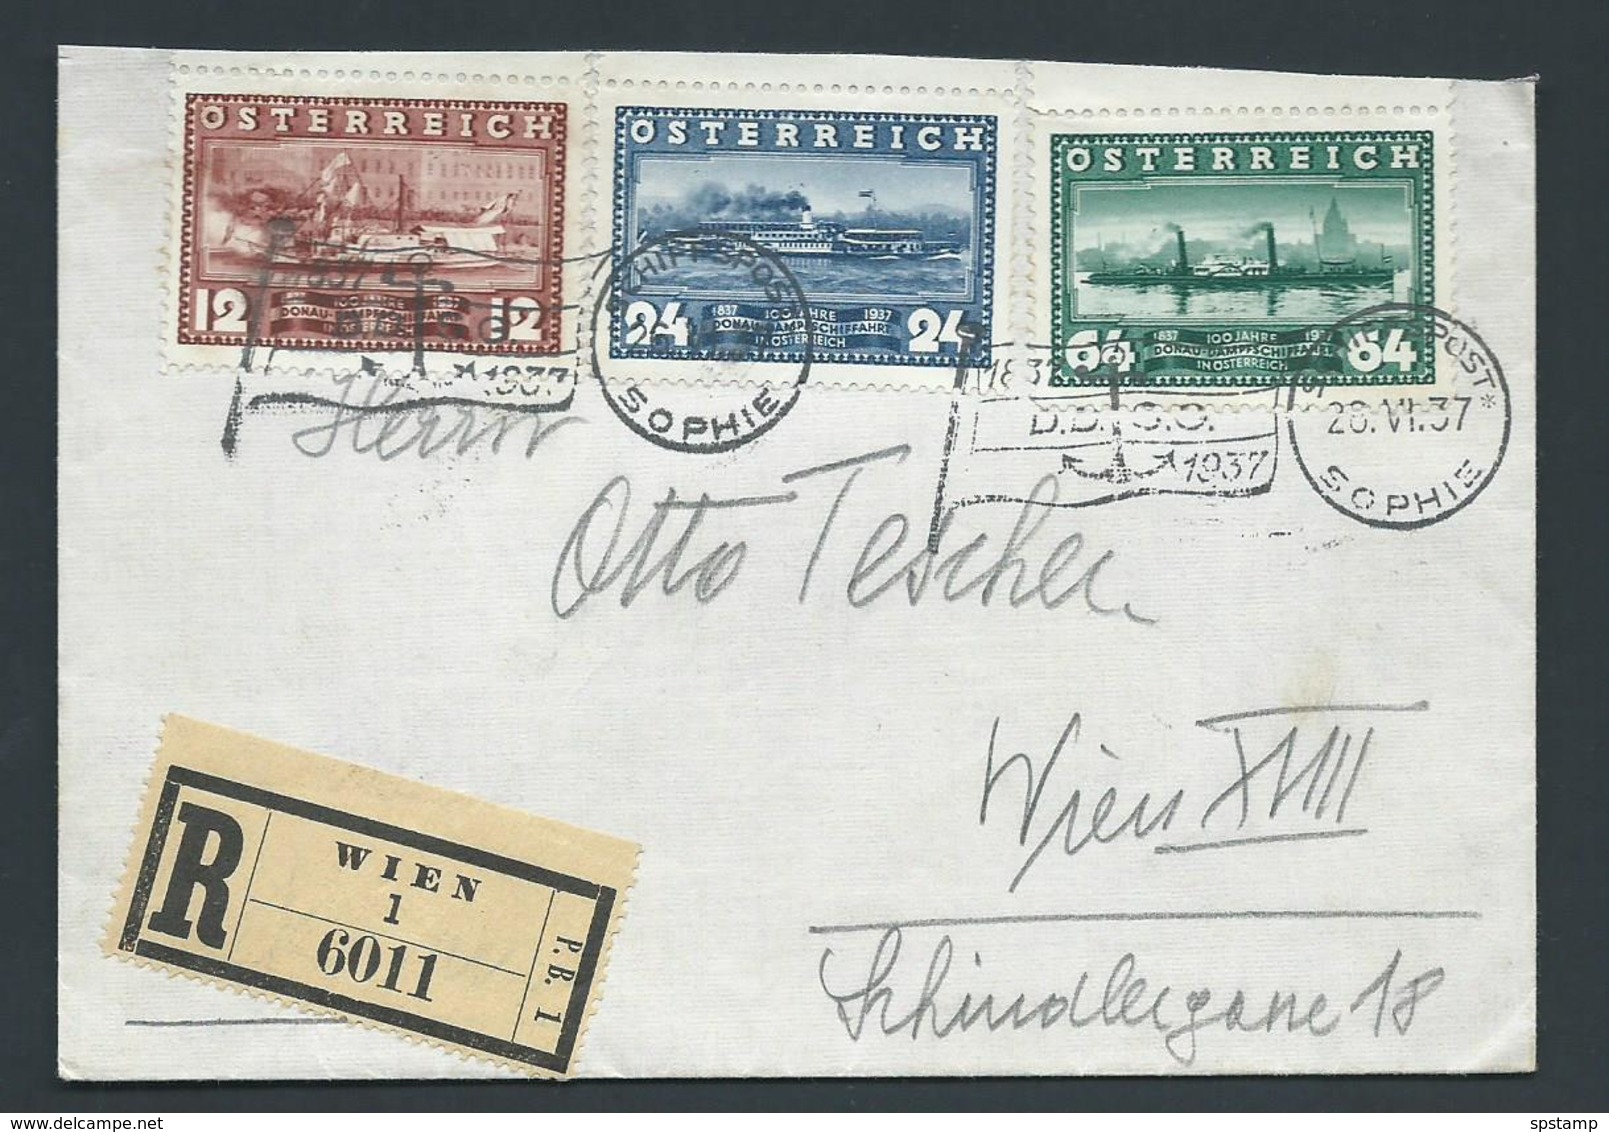 Austria 1937 Anna Maria Steamship Set Of 3 On Registered Wien Cover , Sophie Schiffpost Cancel - Covers & Documents